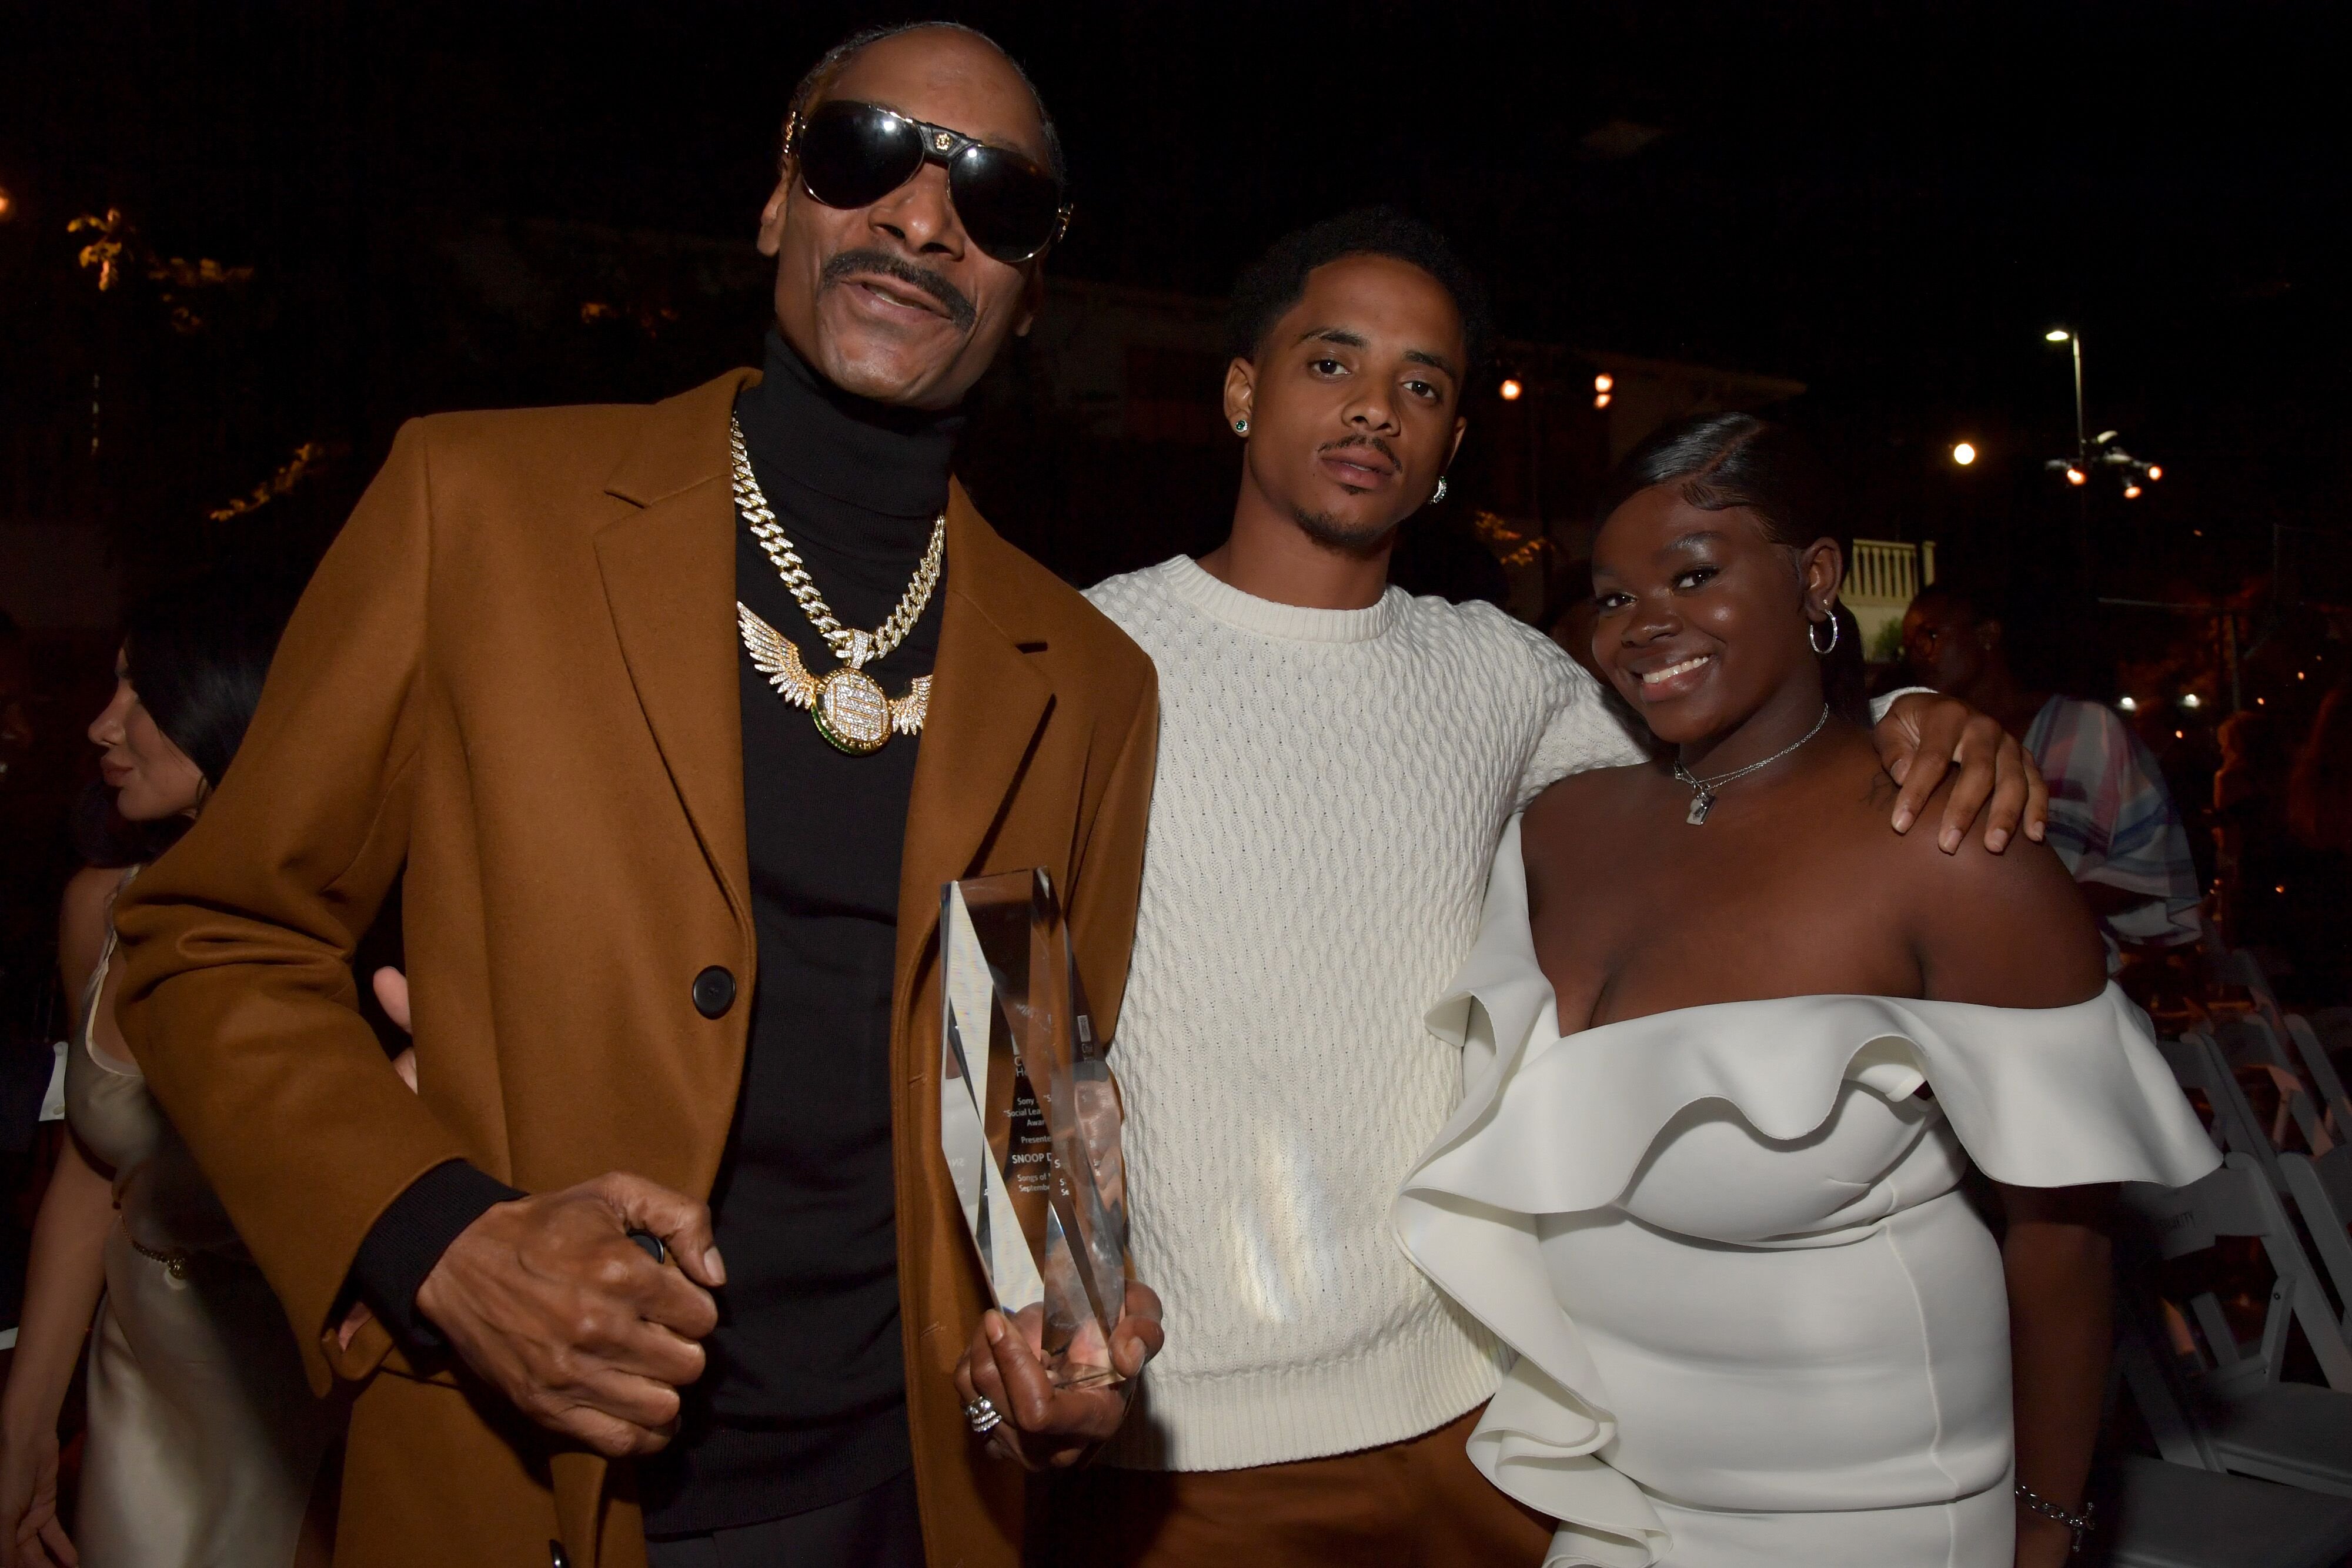 Snoop Dogg and his children ata red carpet event together | Source: Getty Images